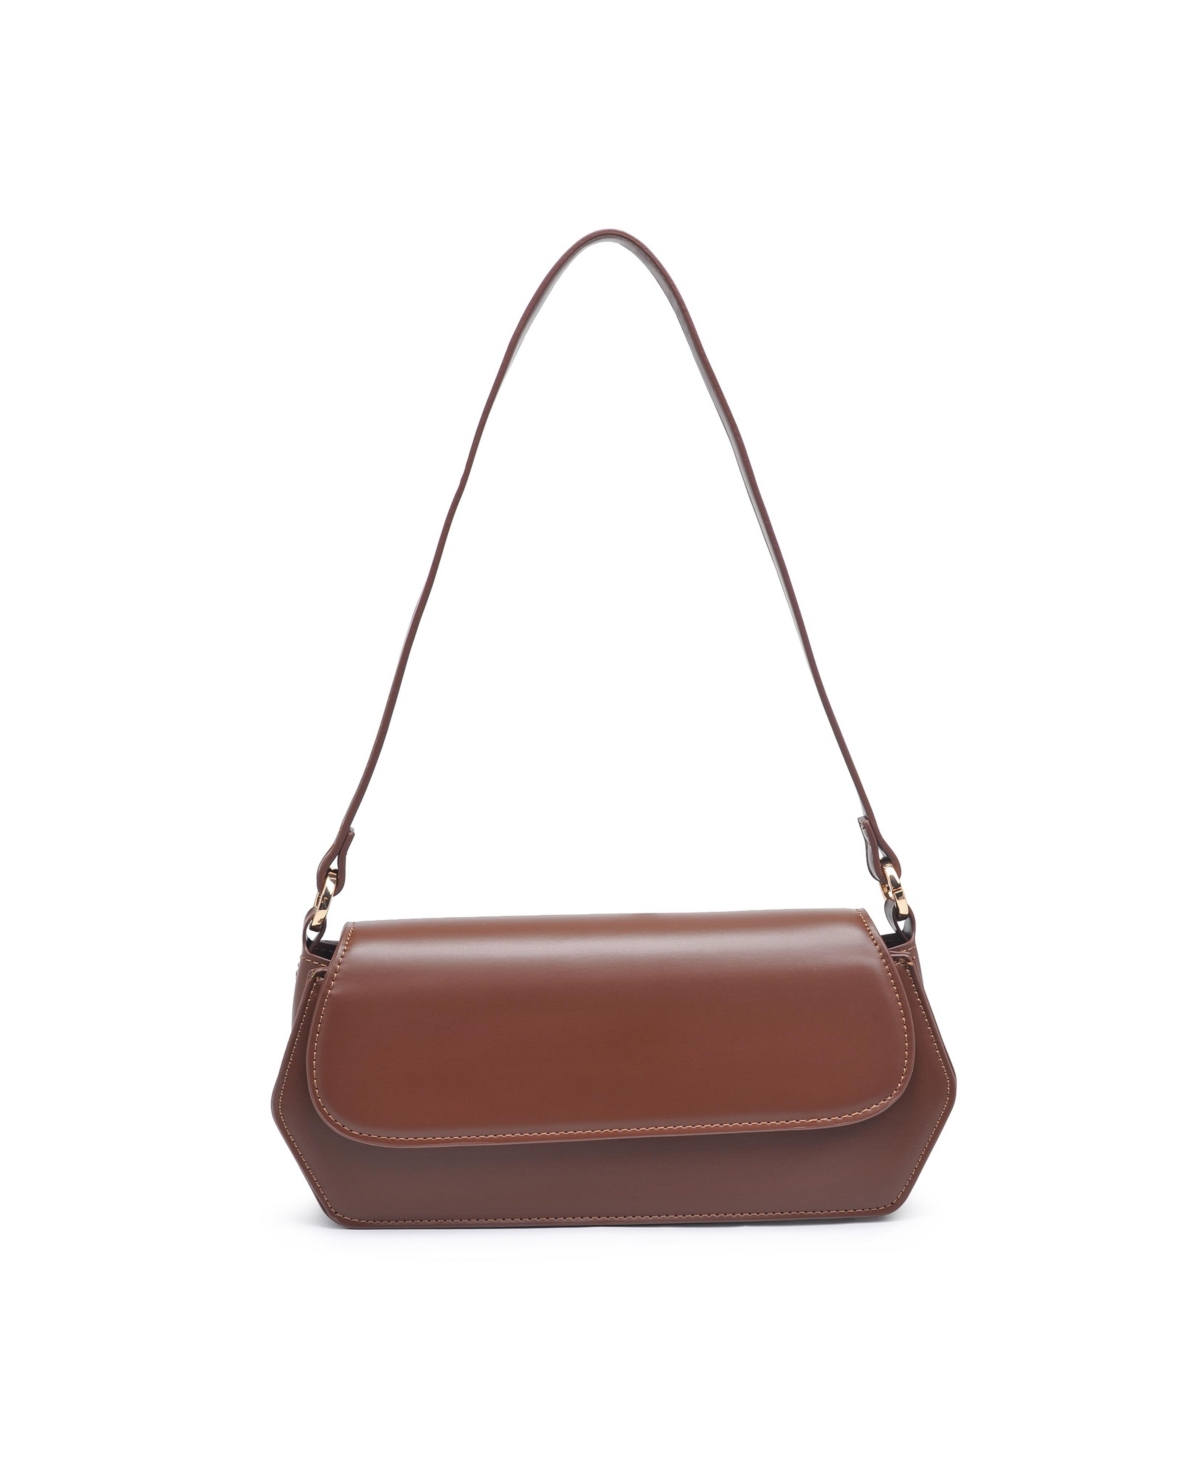 Urban Expressions Judith Shoulder Bag In Chocolate